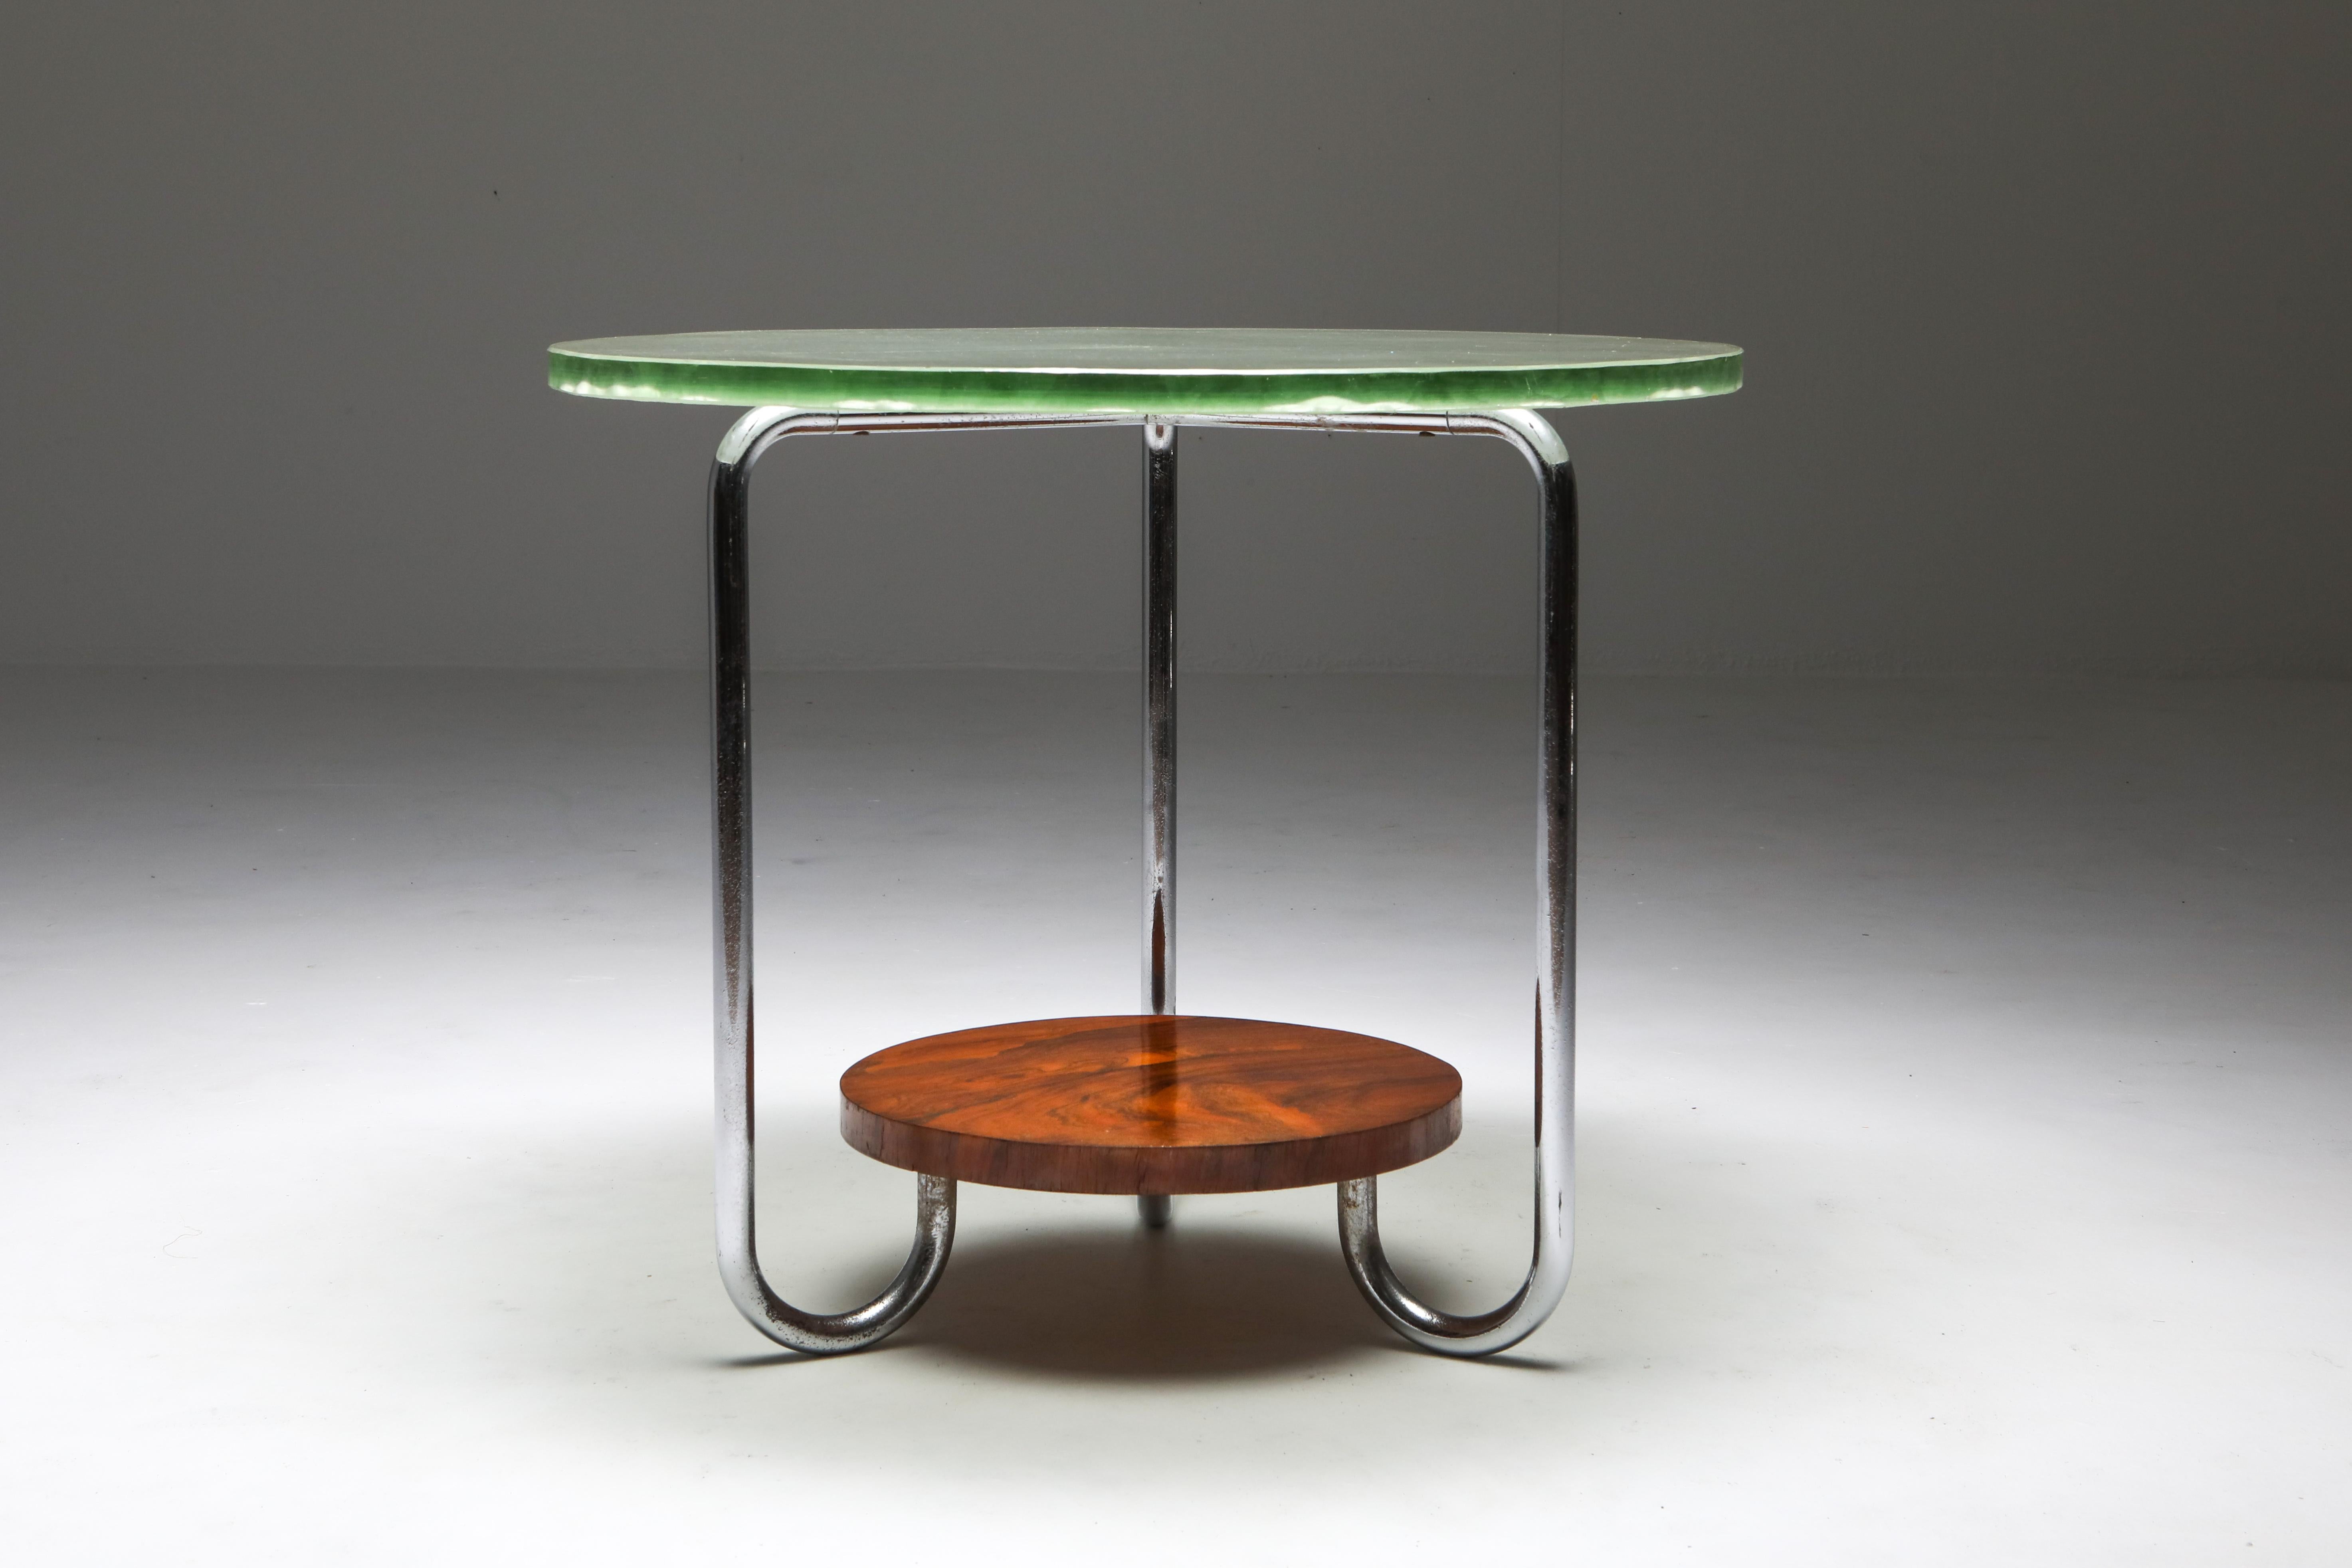 Unusual Art Deco occasional table, France, 1930s

Tubular chromed steel frame connects the rosewood tier with the thick glass top.
Remarkable glass top, very thick with organica etched carvings.
A spectacular piece.

  